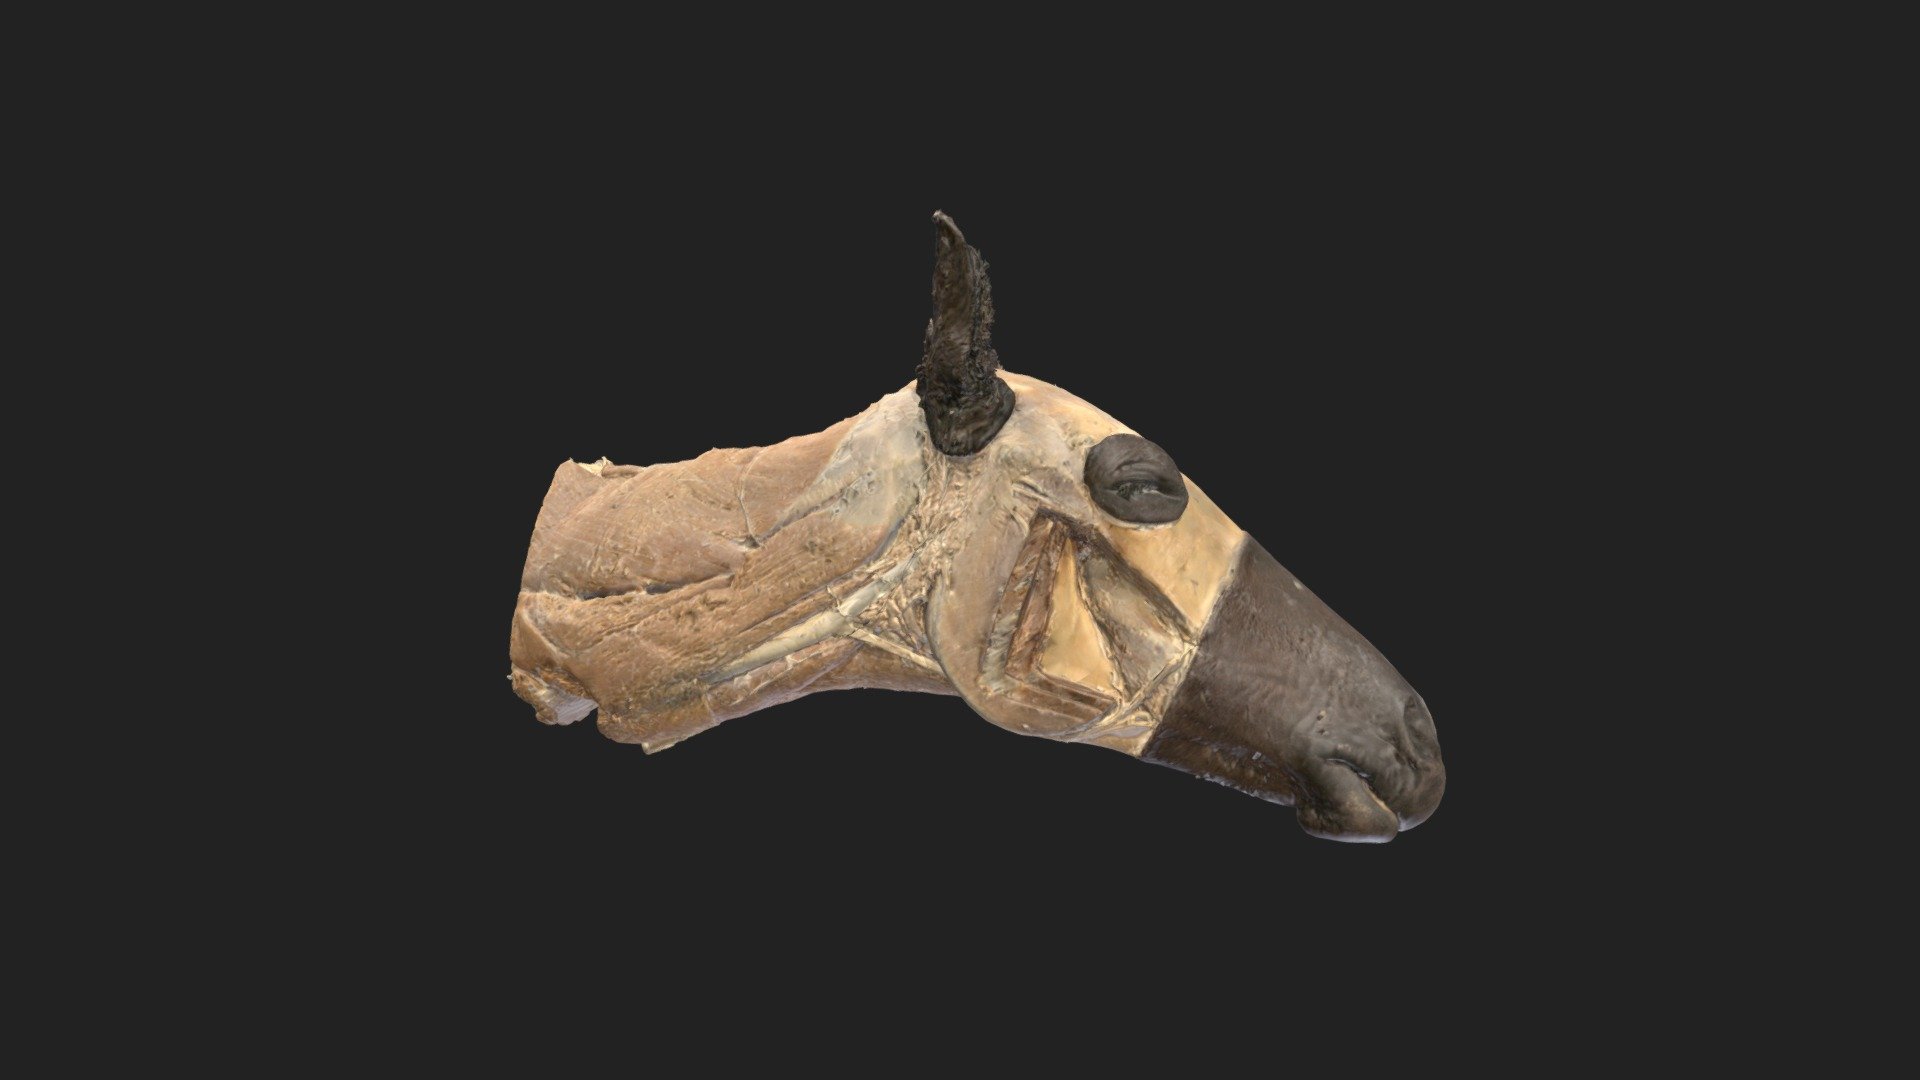 the head of a horse with a cutout of different layers of the masticatory muscles

size of specimen: 660.6 x 358.8 x 181.9 mm

3D scanning performed with the structured light scanners “Artec Leo” and “Artec Space Spider” - head of horse with masticatory muscels - 3D model by vetanatMunich 3d model